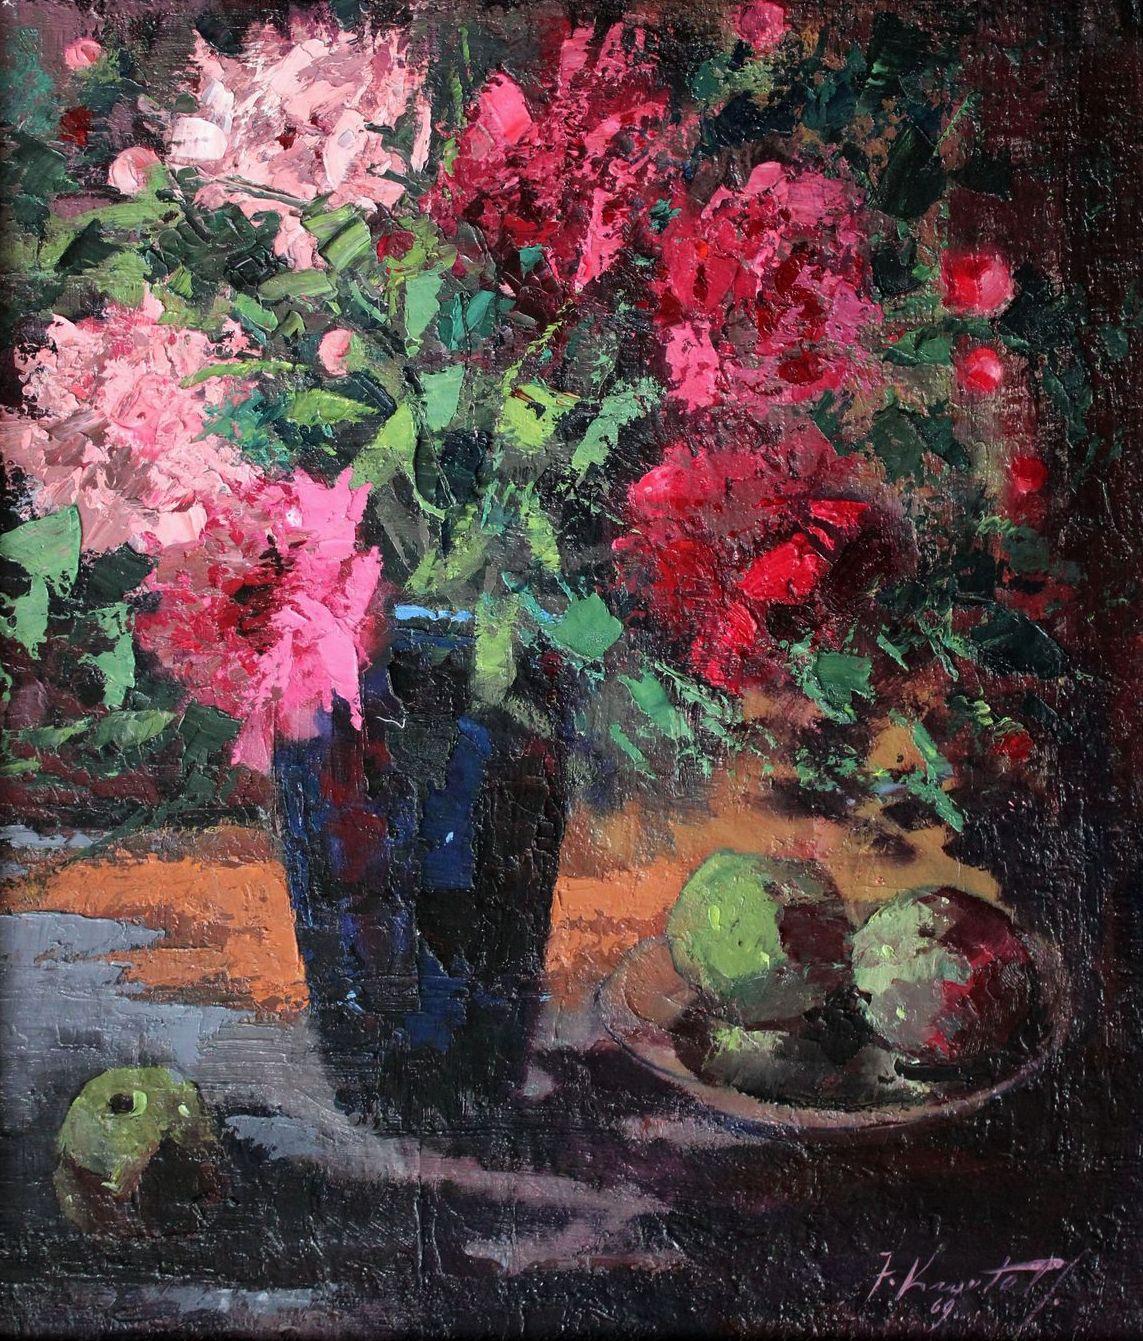 Janis Krontals  Figurative Painting - Still life with peonies. 1969, plywood, oil, 68x59 cm